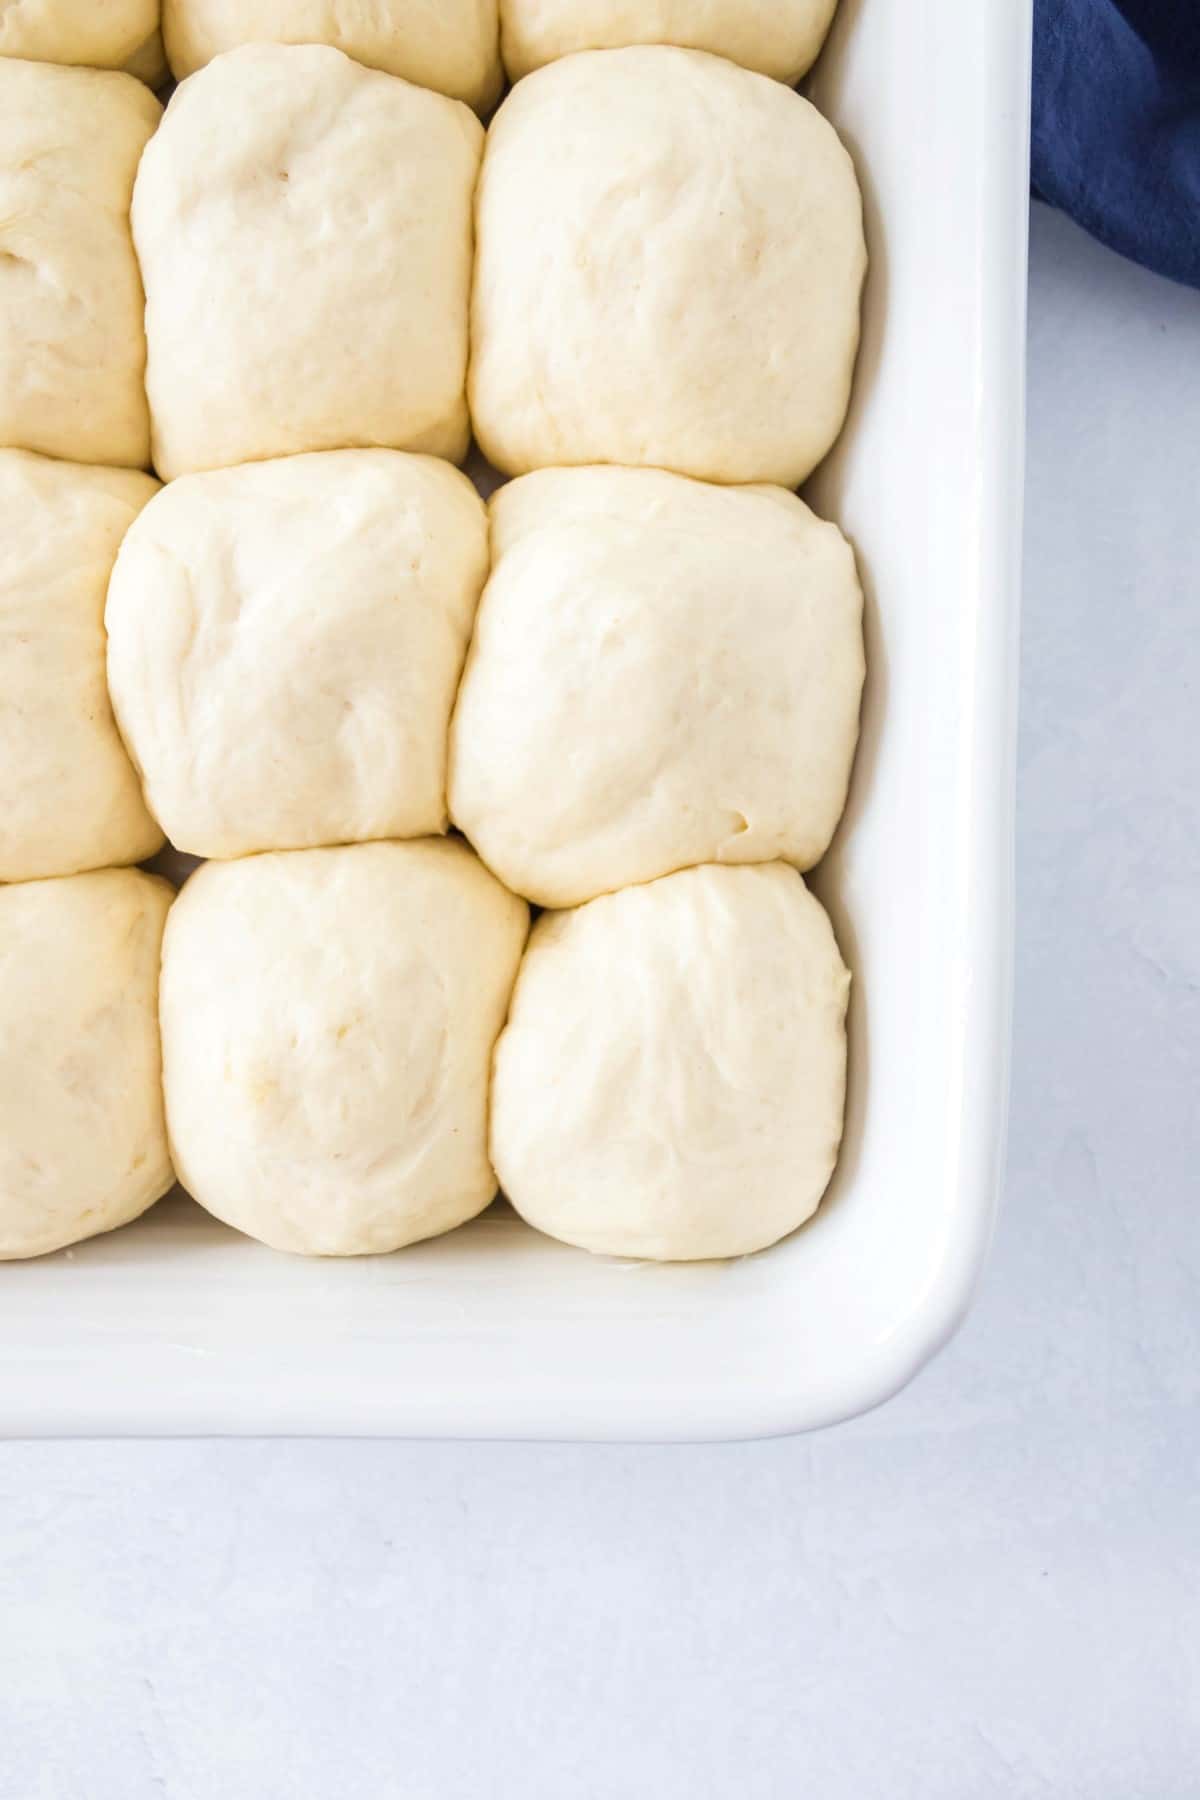 Unbaked rolls in a baking pan. 